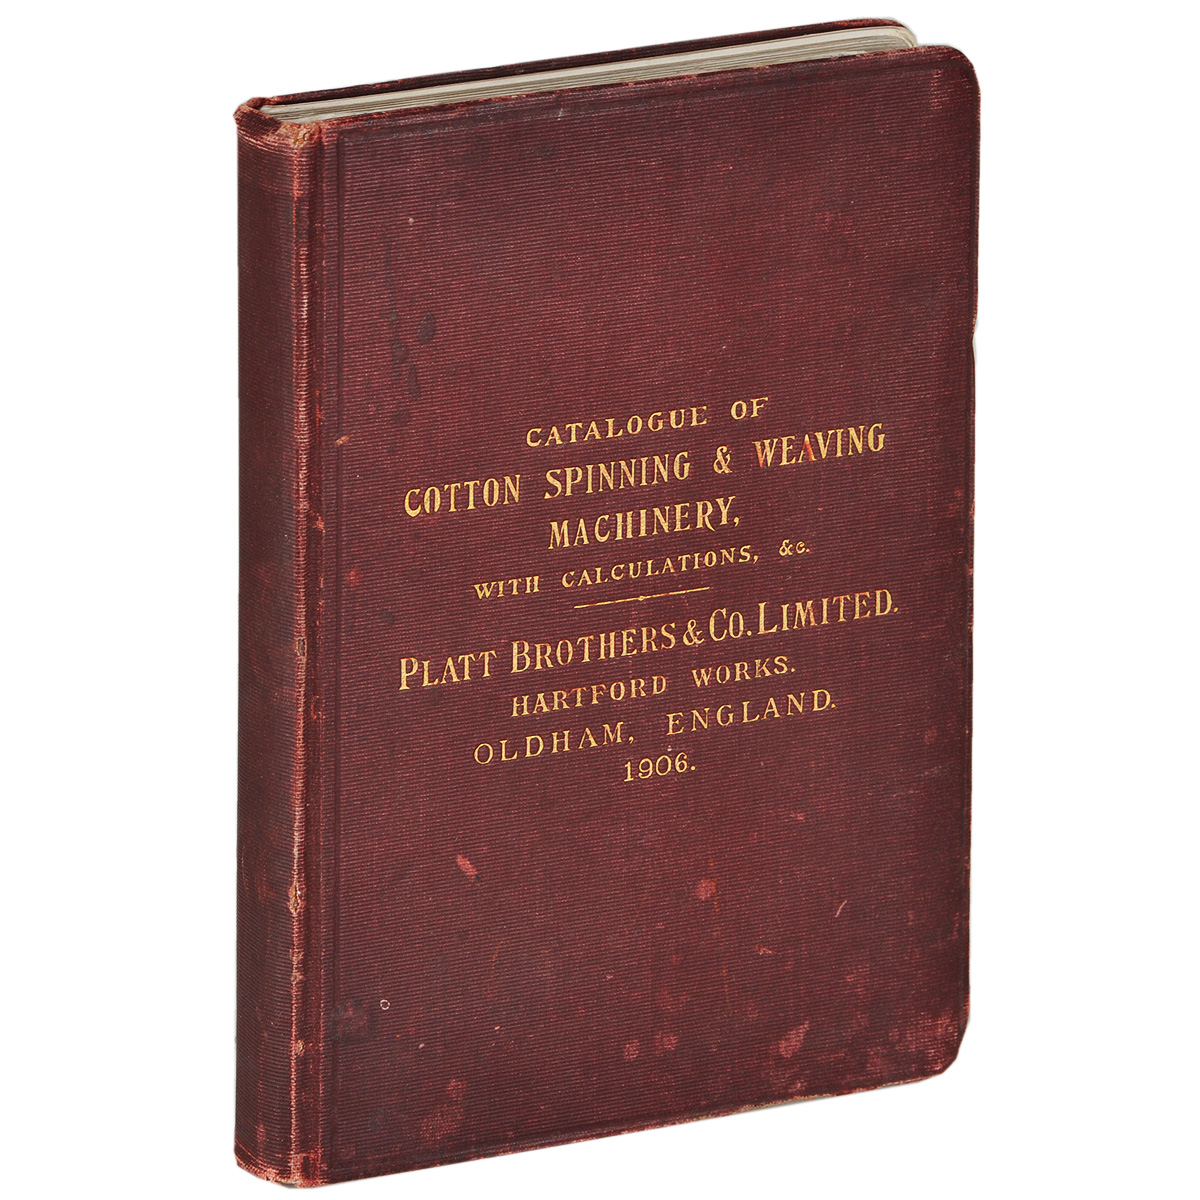 Catalogue of Cotton Spinning&Weaving Machinery